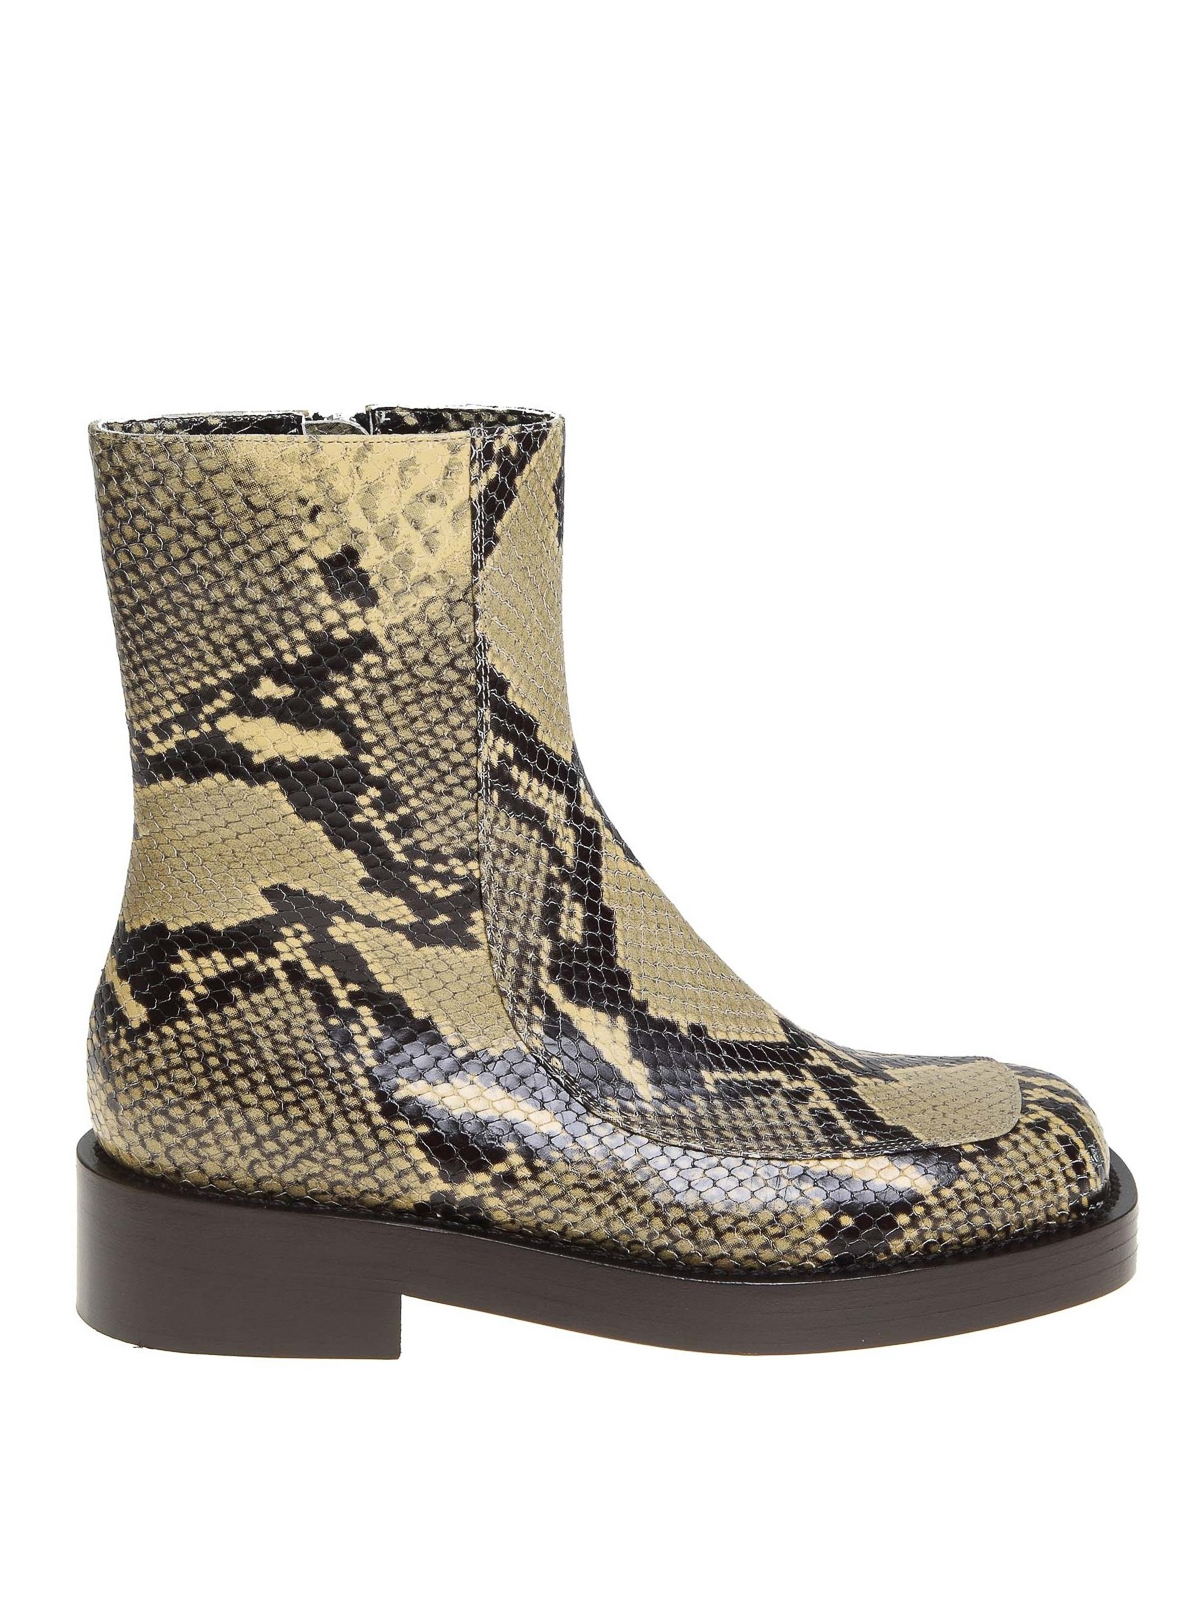 MARNI PYTHON PATTERN LEATHER ANKLE BOOTS